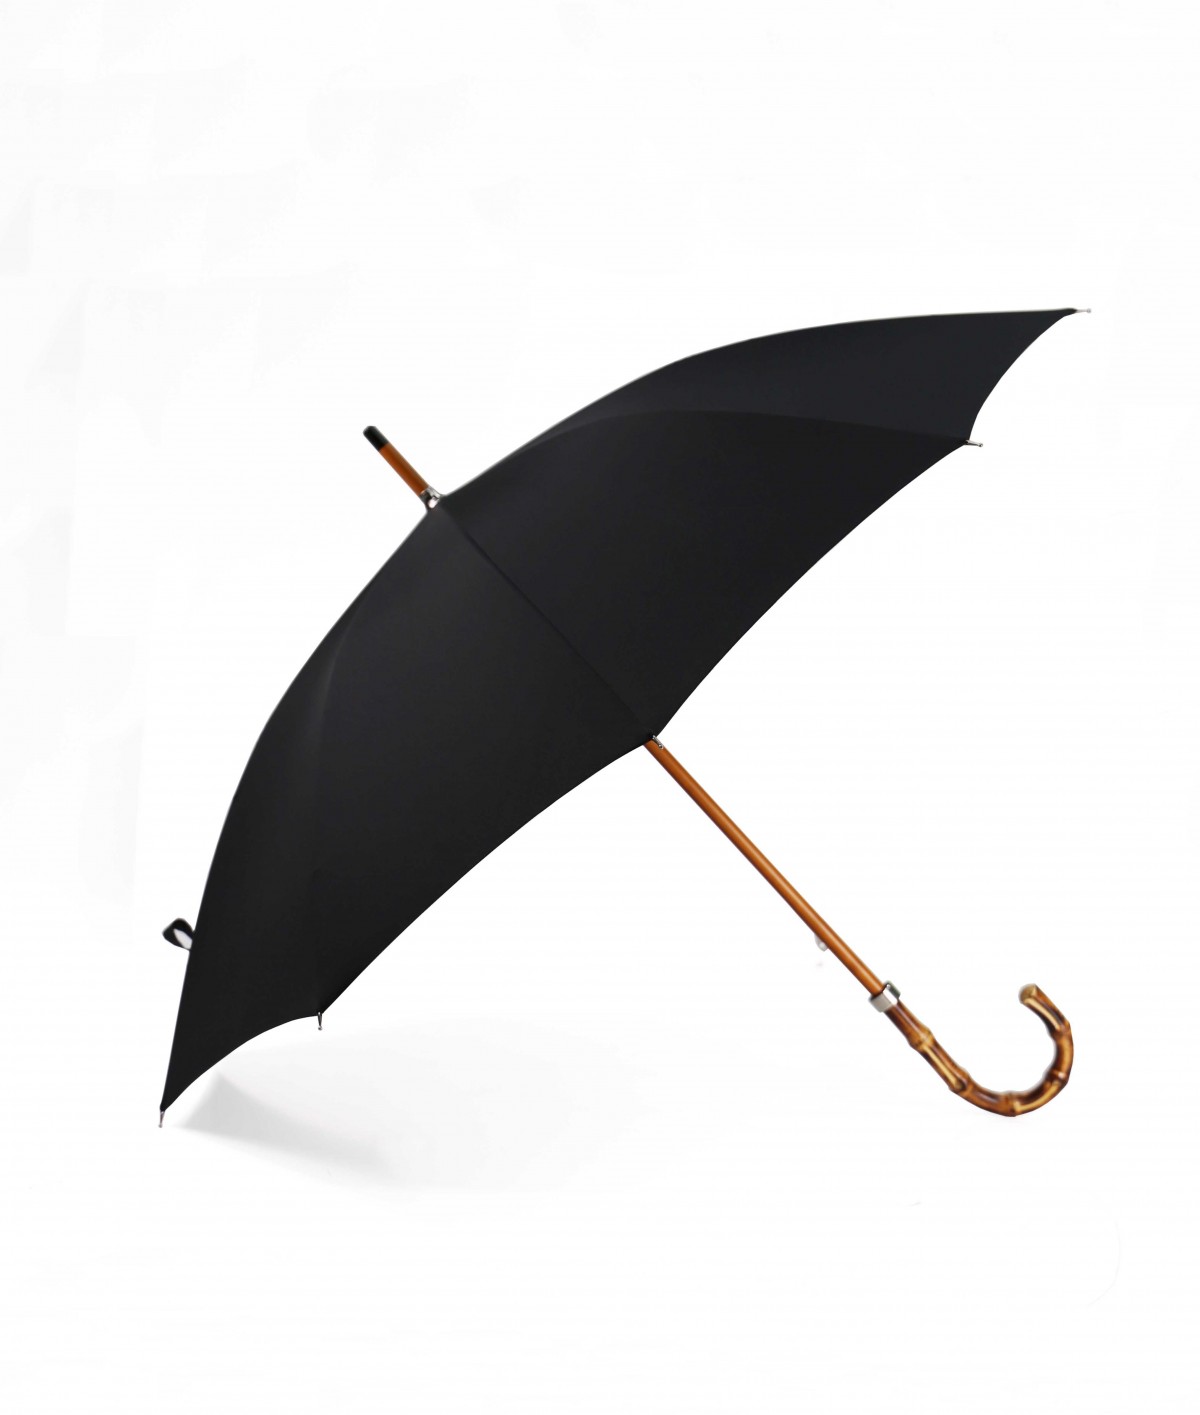 → "The exotic" Umbrella Black - Handcrafted by the French Umbrellas Manufacturer Maison Pierre Vaux